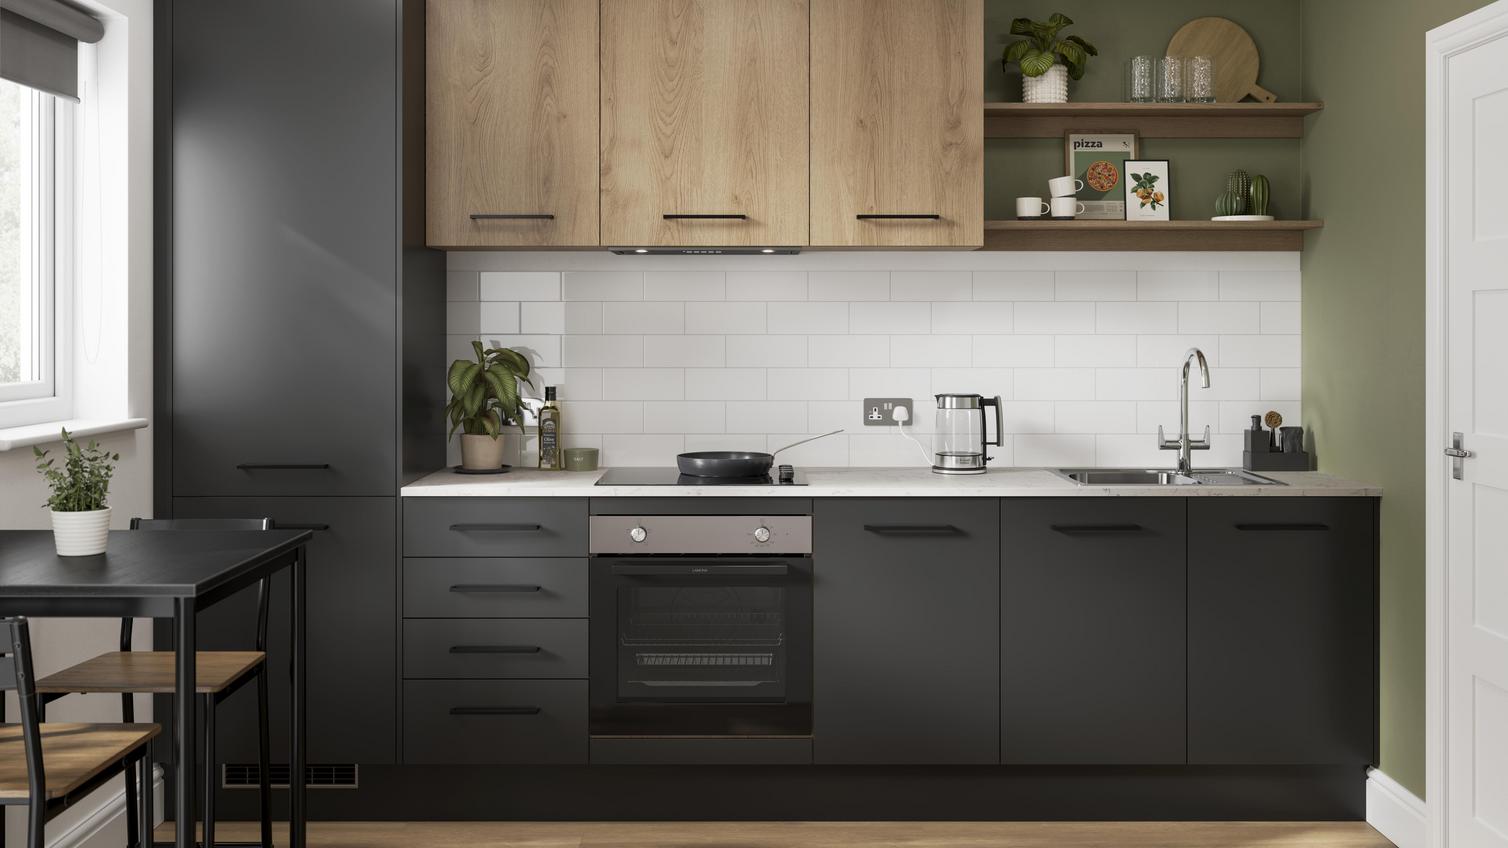 A two-tone, one wall kitchen, with dark, charcoal-coloured cabinetry and some oak cabinets that match the floor